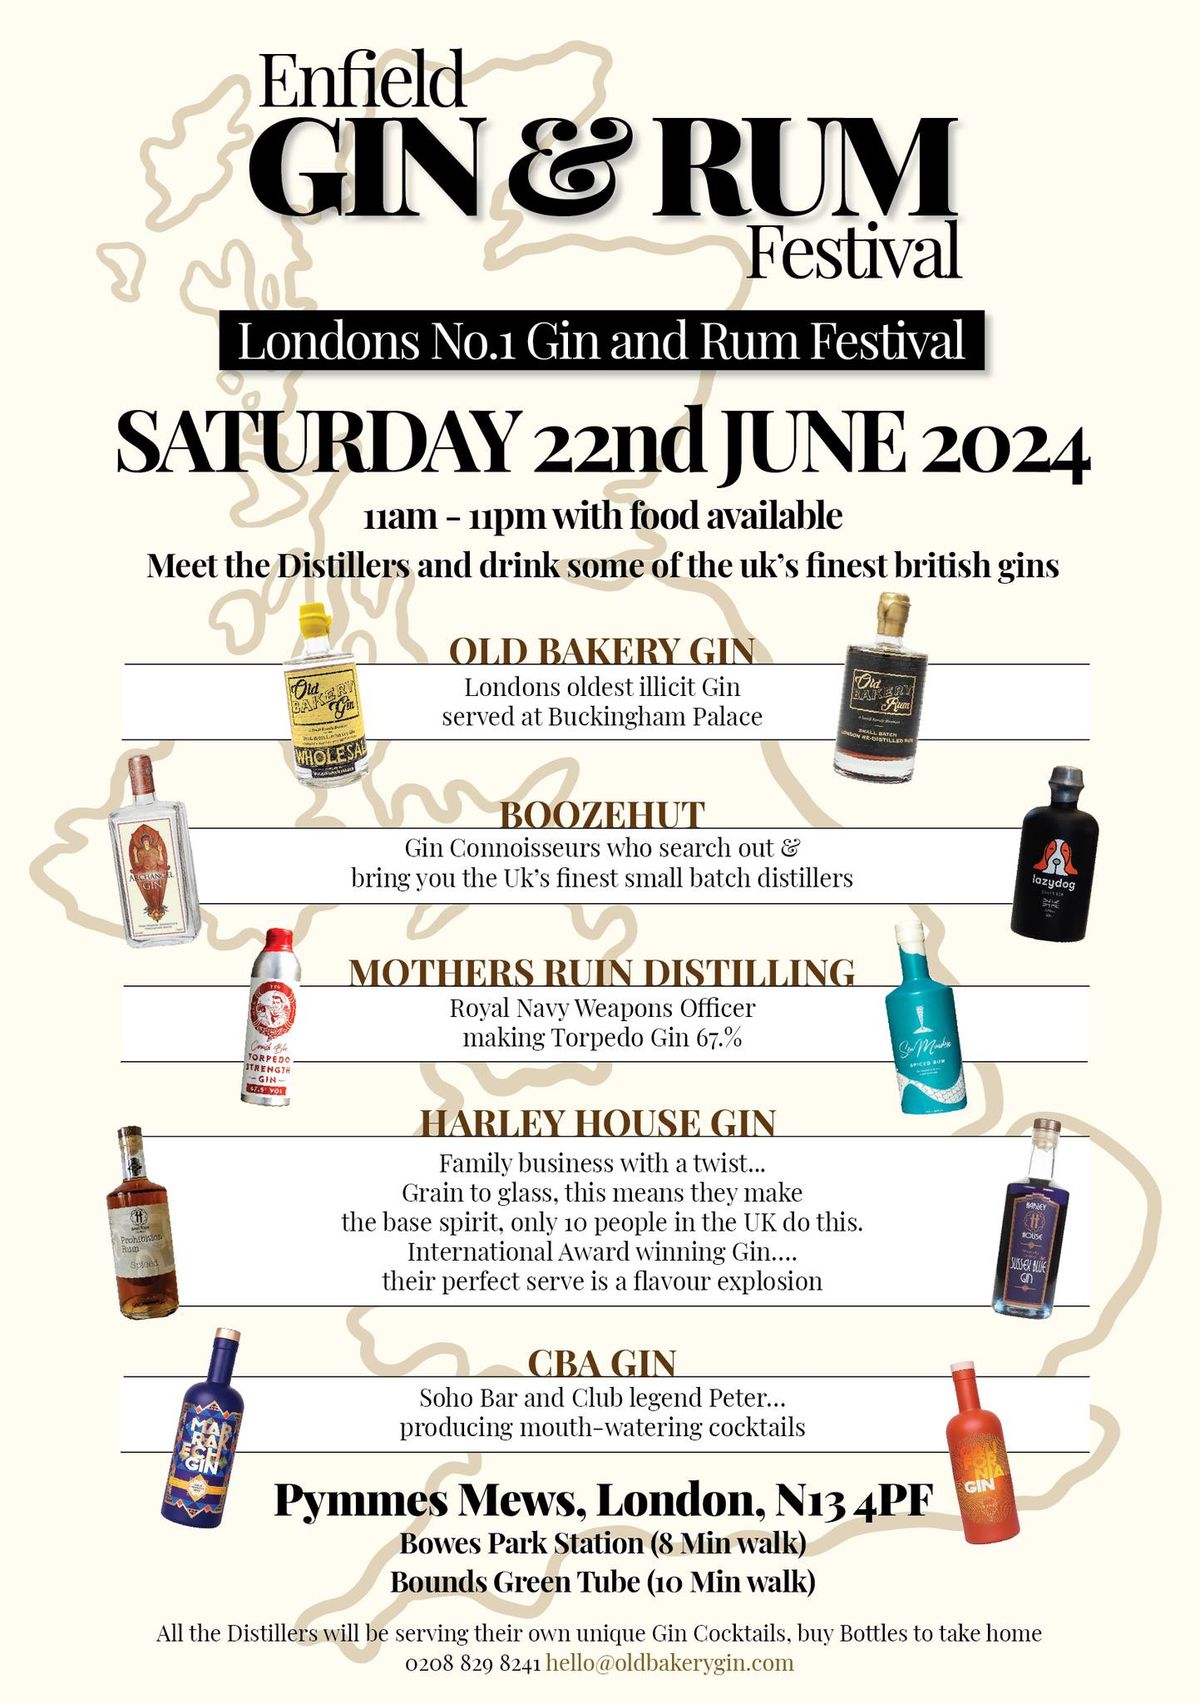 Enfield Gin & Rum Festival 2024 FREE EVENT